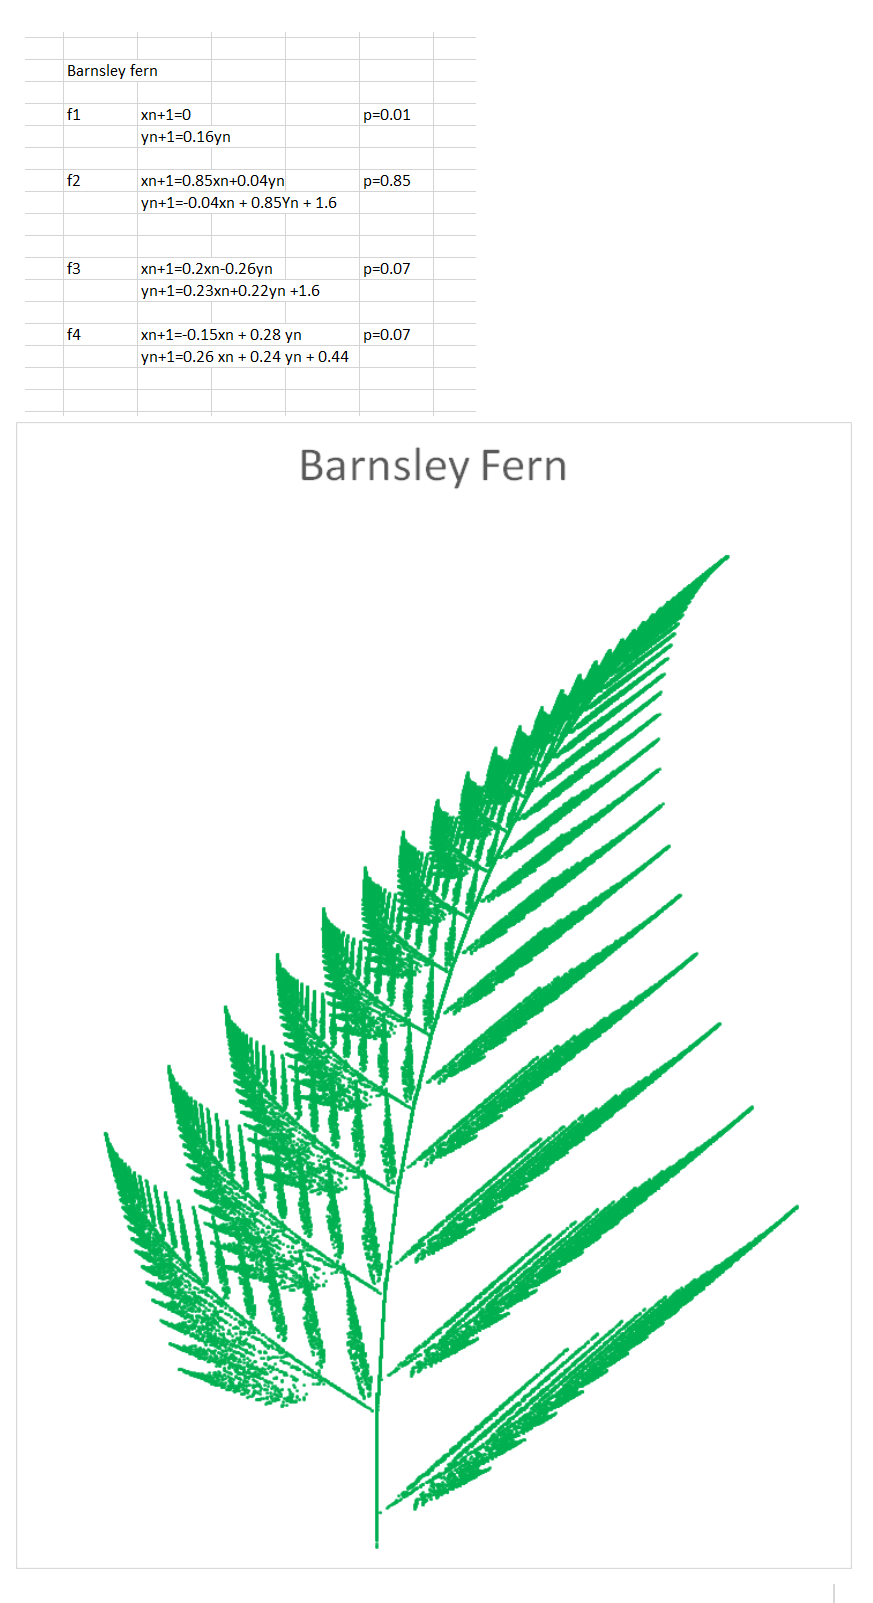 Barnsley Fern in Excel.png